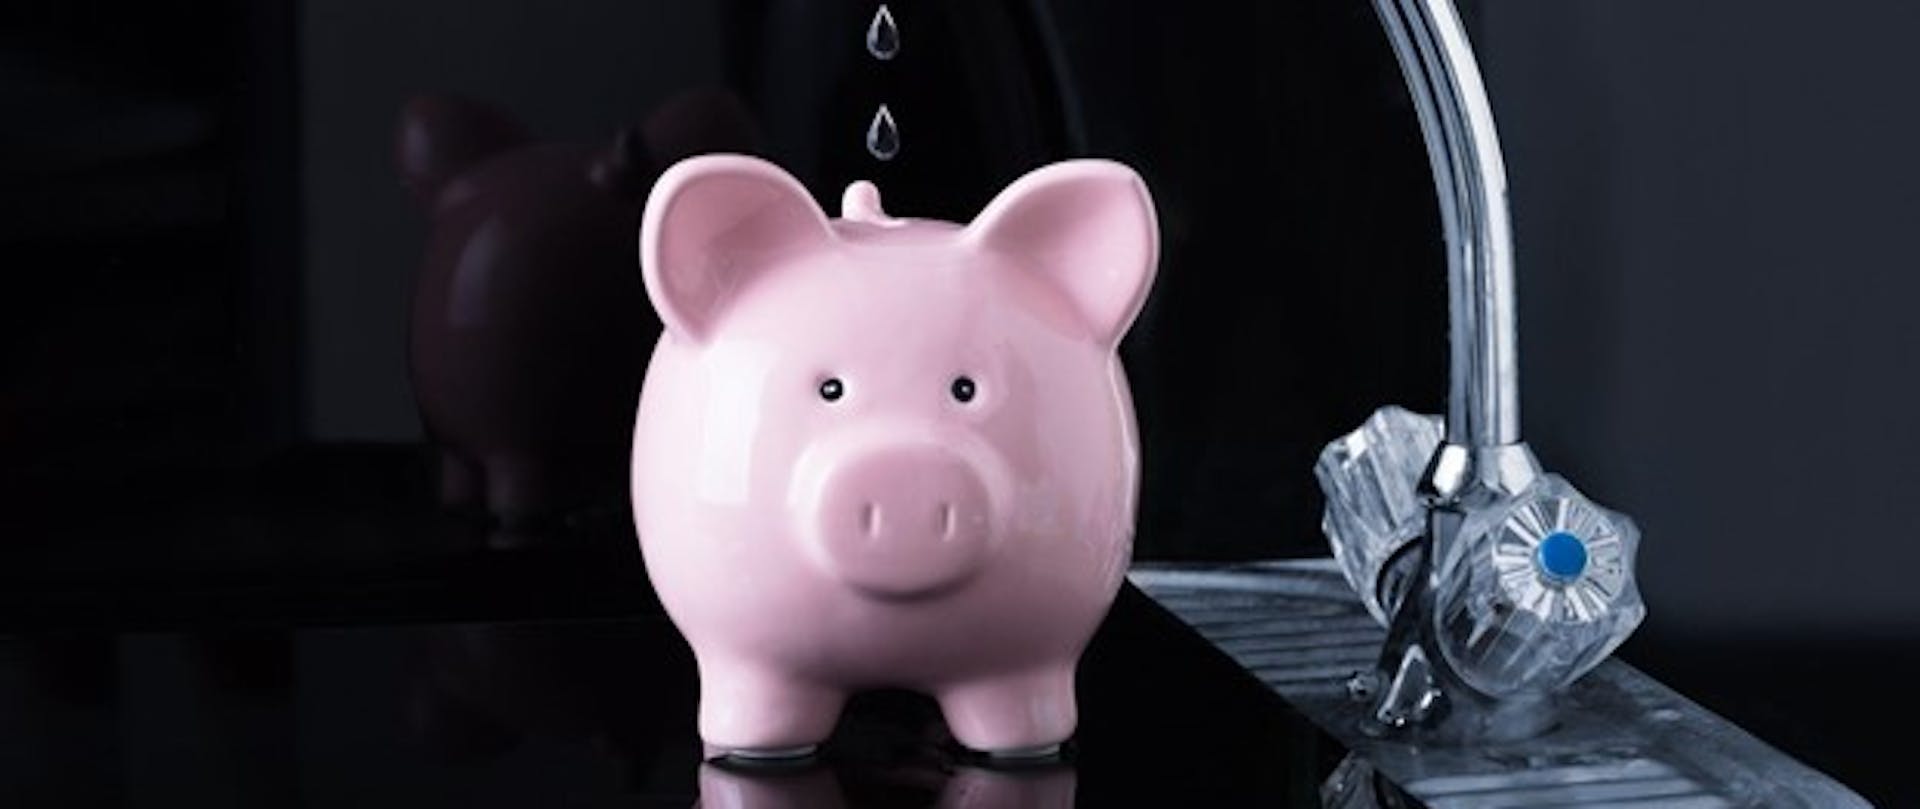 How to Save Water at Home Illustration of Piggy Bank Under Faucet